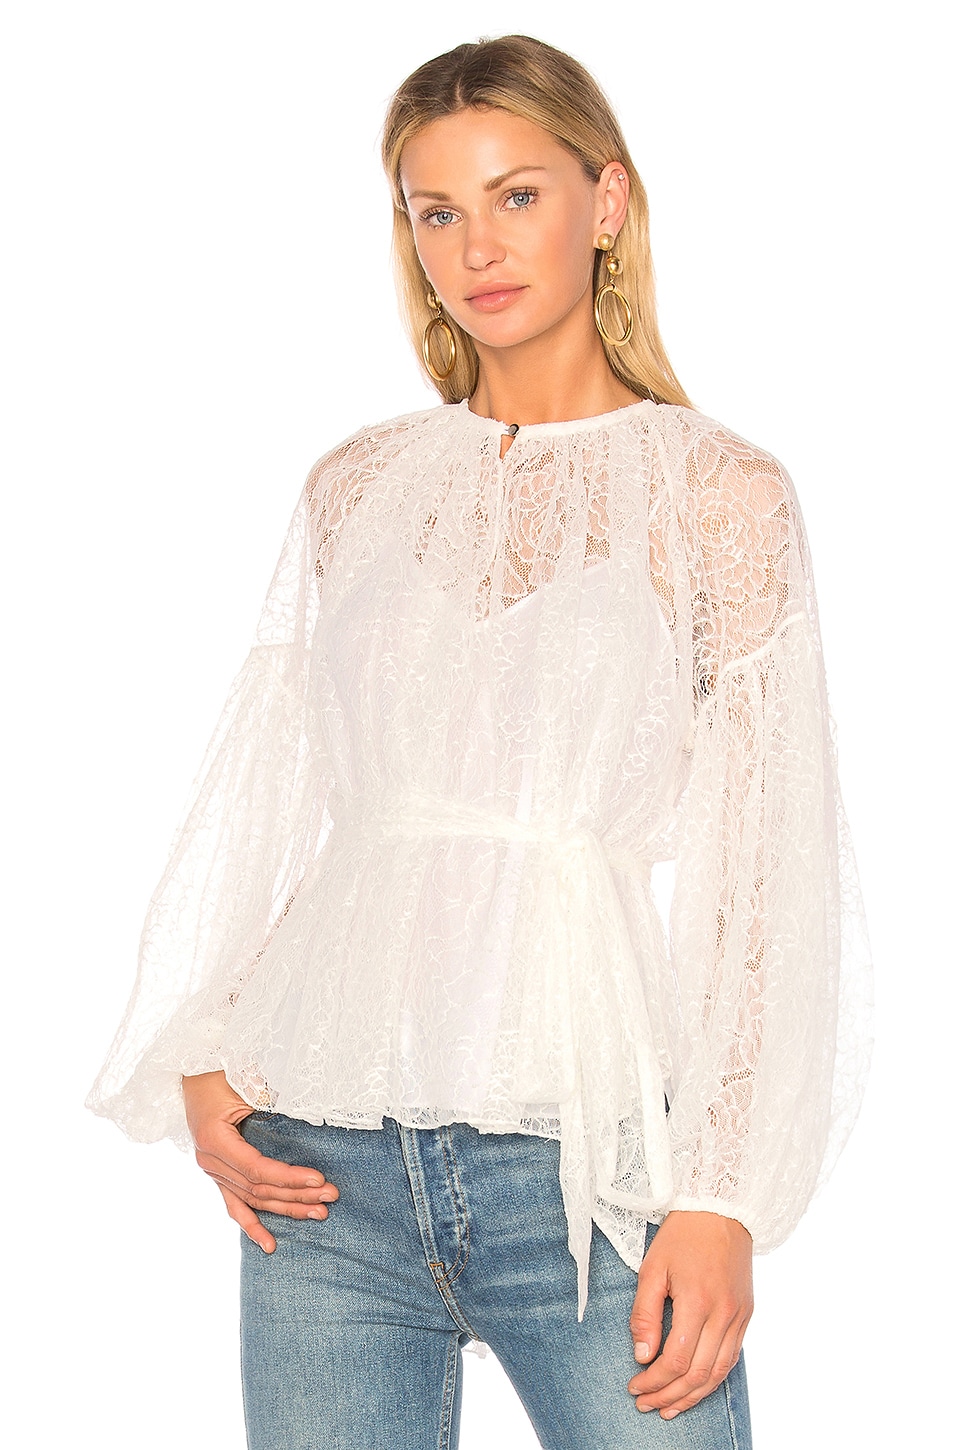 Lover Plume Lace Blouse in Ivory | REVOLVE